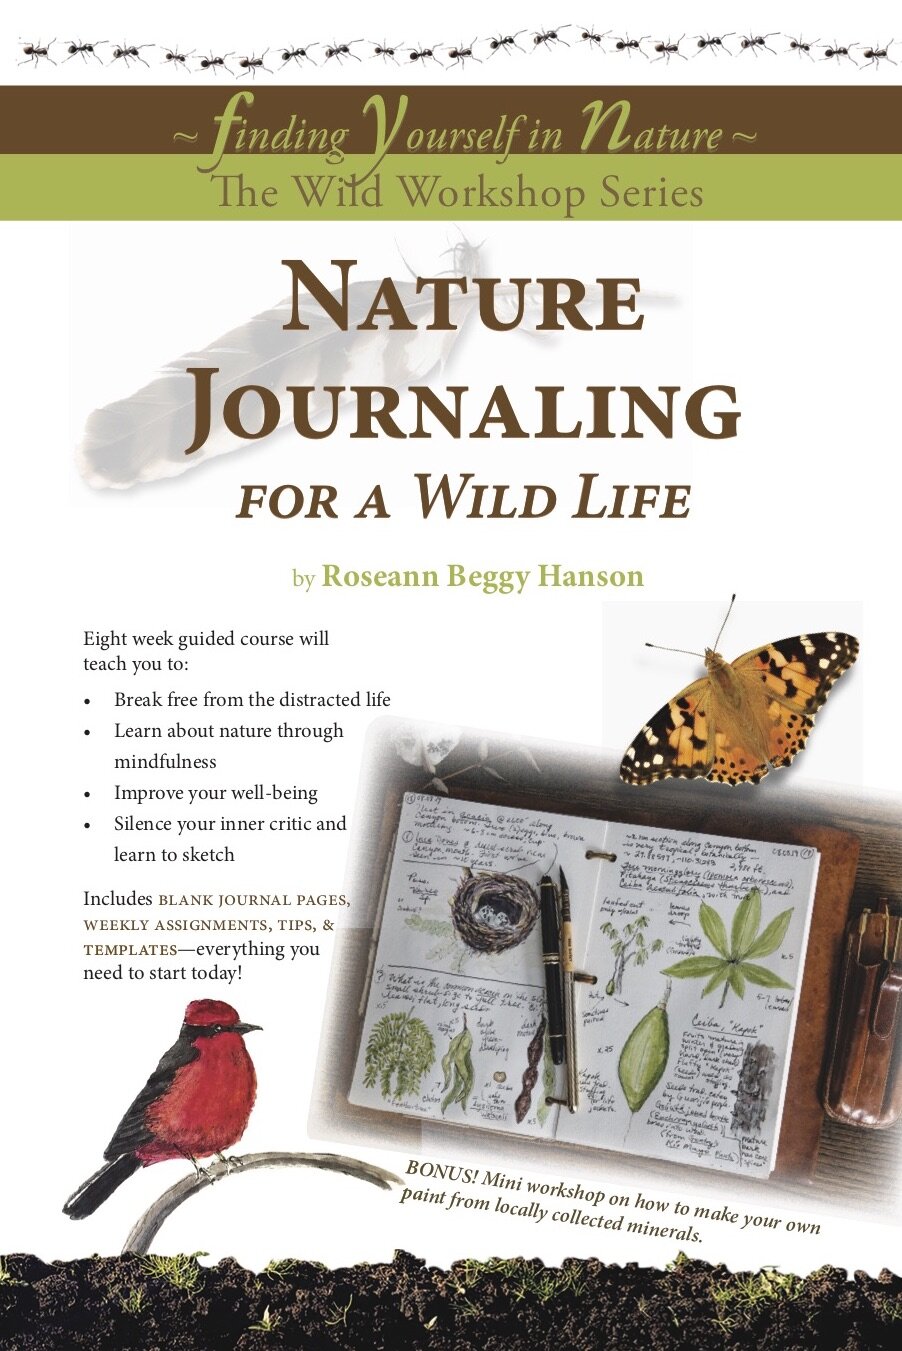 Nature Journaling for a Wild Life: Finding Yourself in Nature: the Wild Life Series [Book]